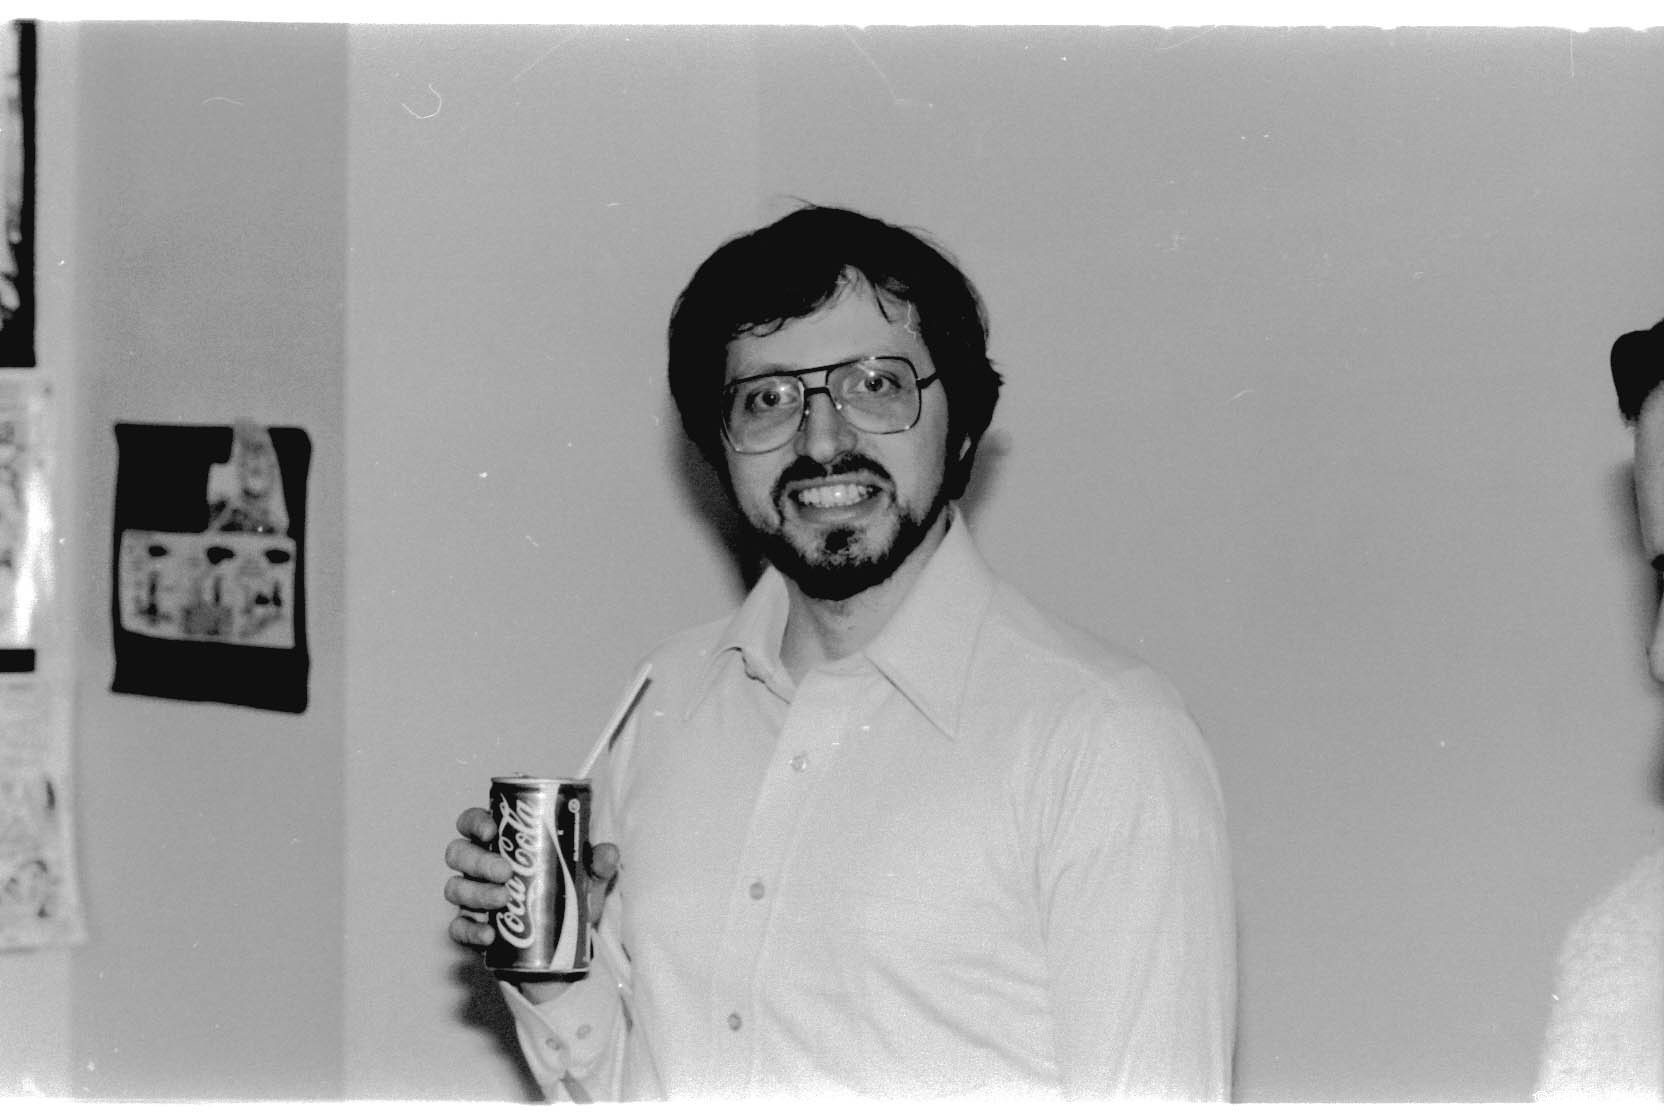 Marv Wolfman. Marv was one of the "Creator Editors" who essentially wrote their own stuff and also had an office at Marvel. Marv did a pretty good job on Crazy Magazine but was super famous for his Dracula work. He was such a mild-mannered guy, but isn't that the way?